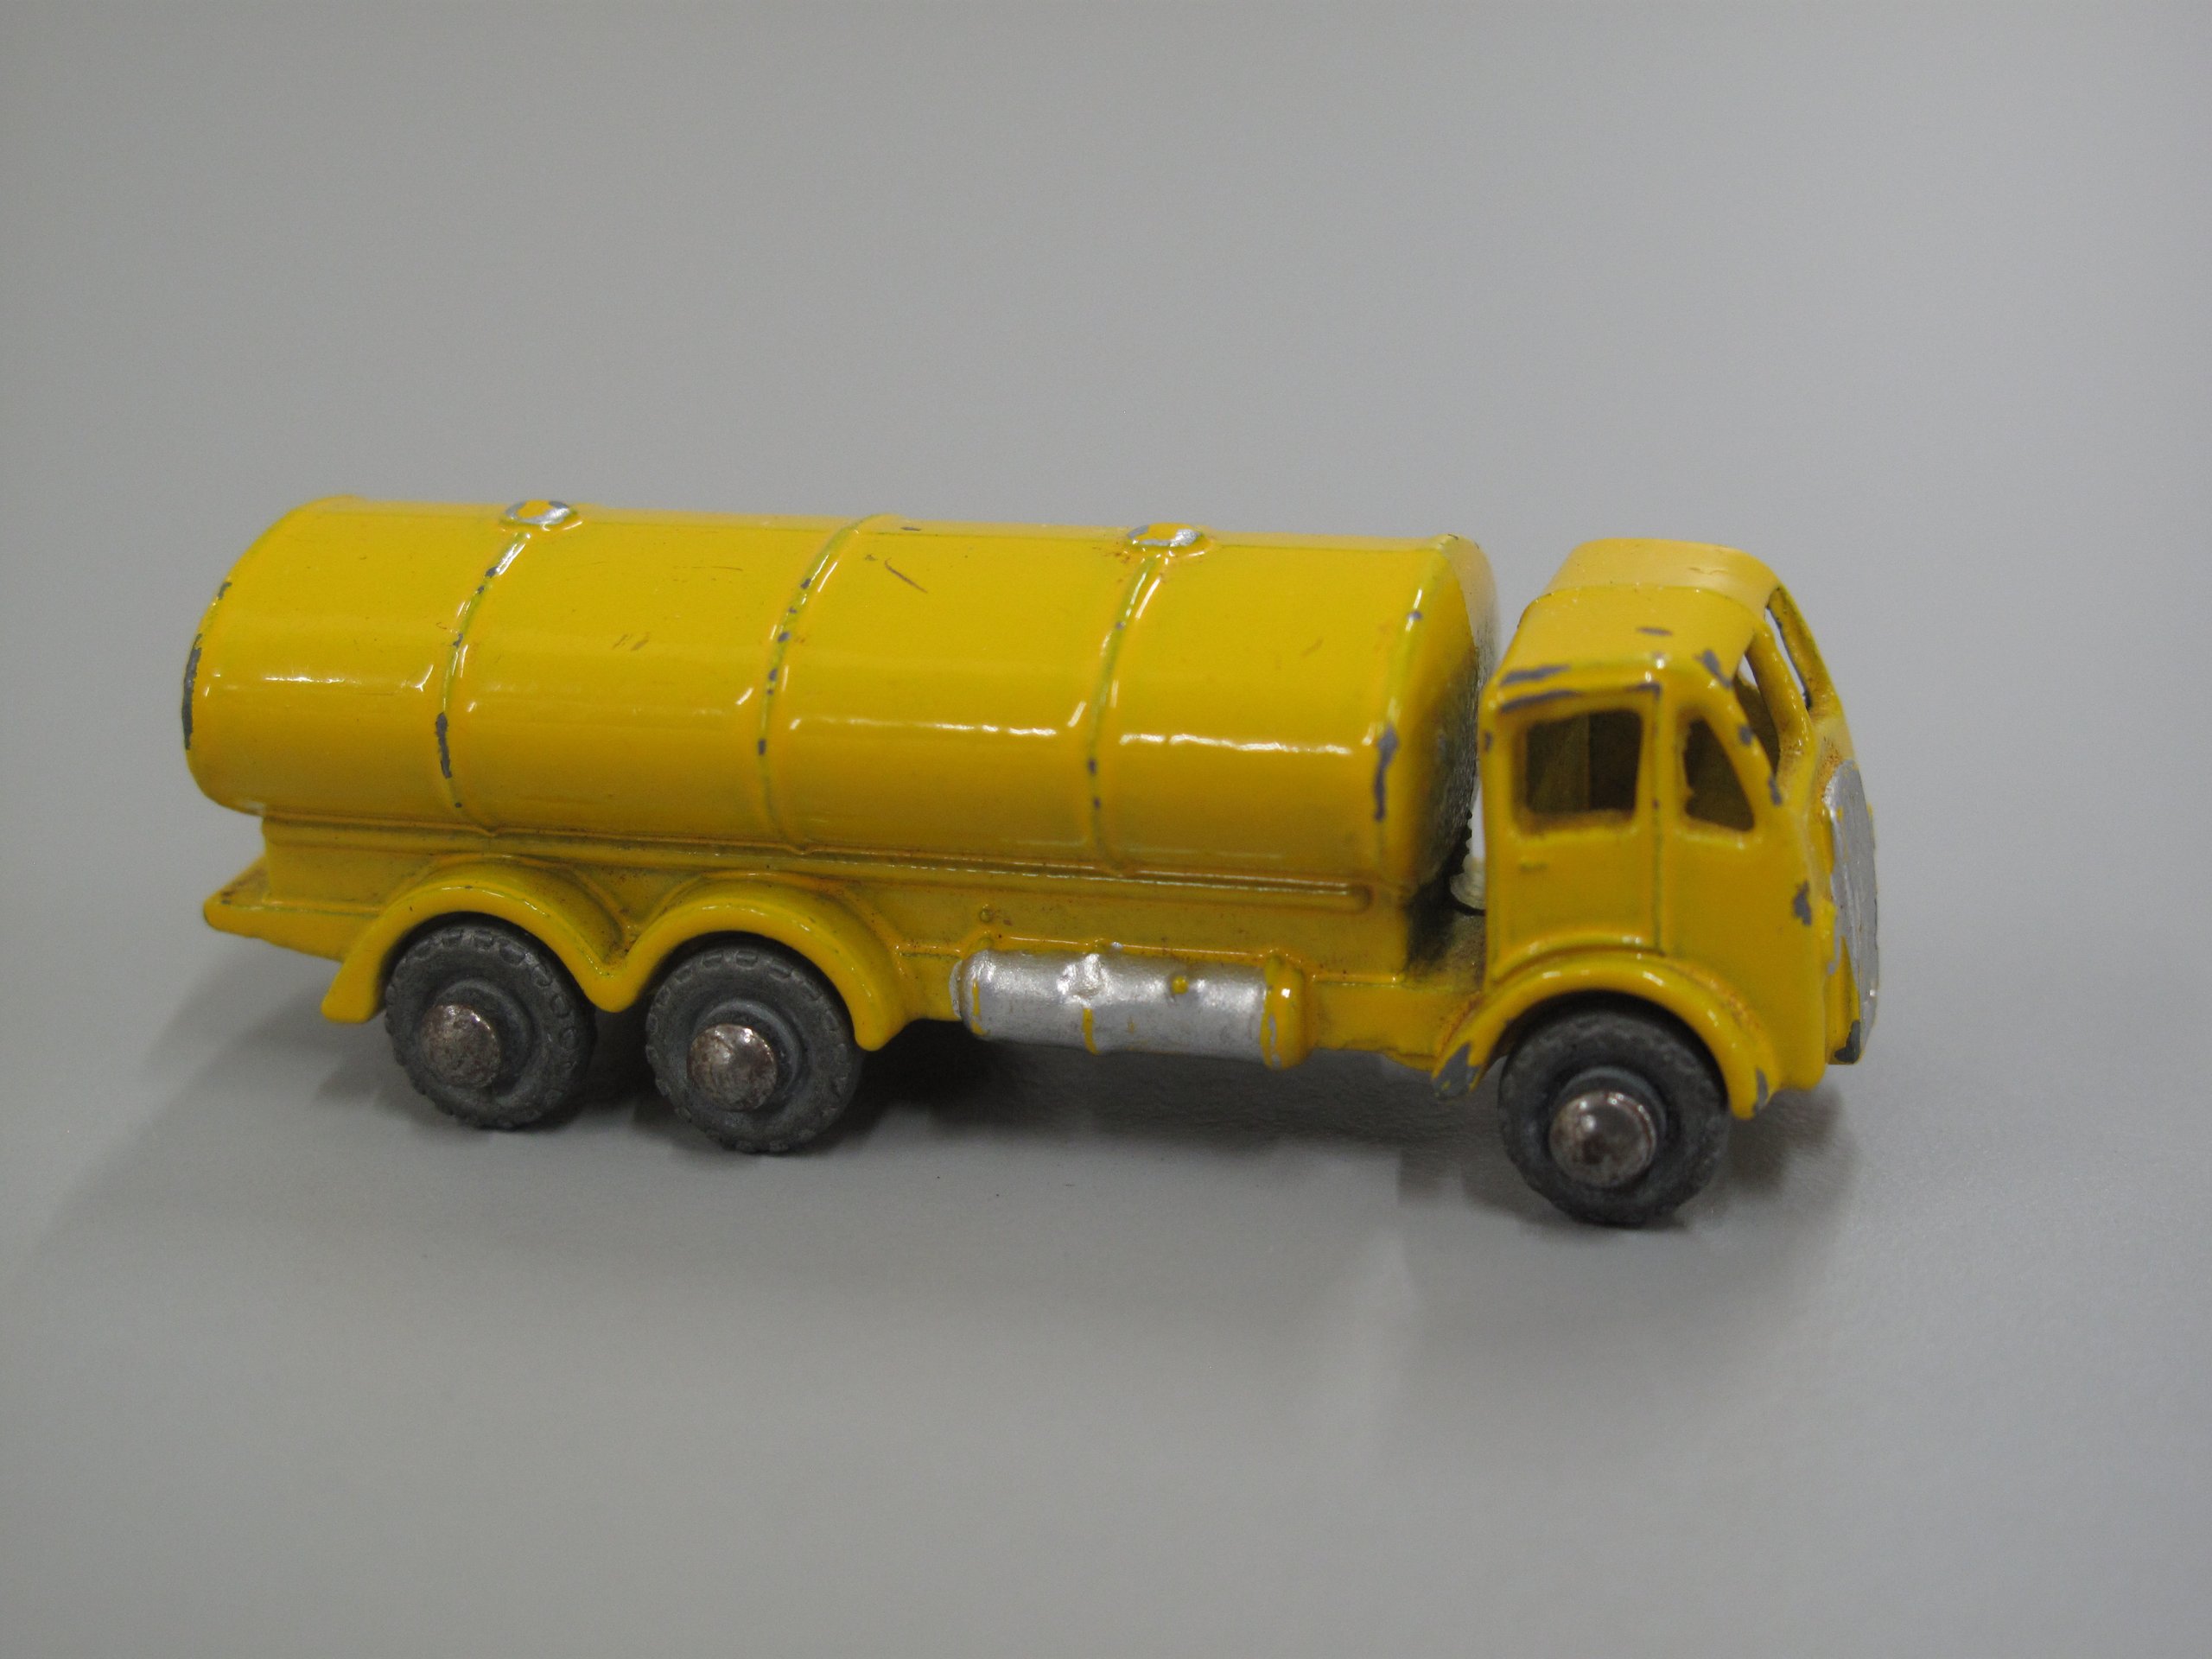 Toy matchbox ERF petrol tanker truck made by Lesney